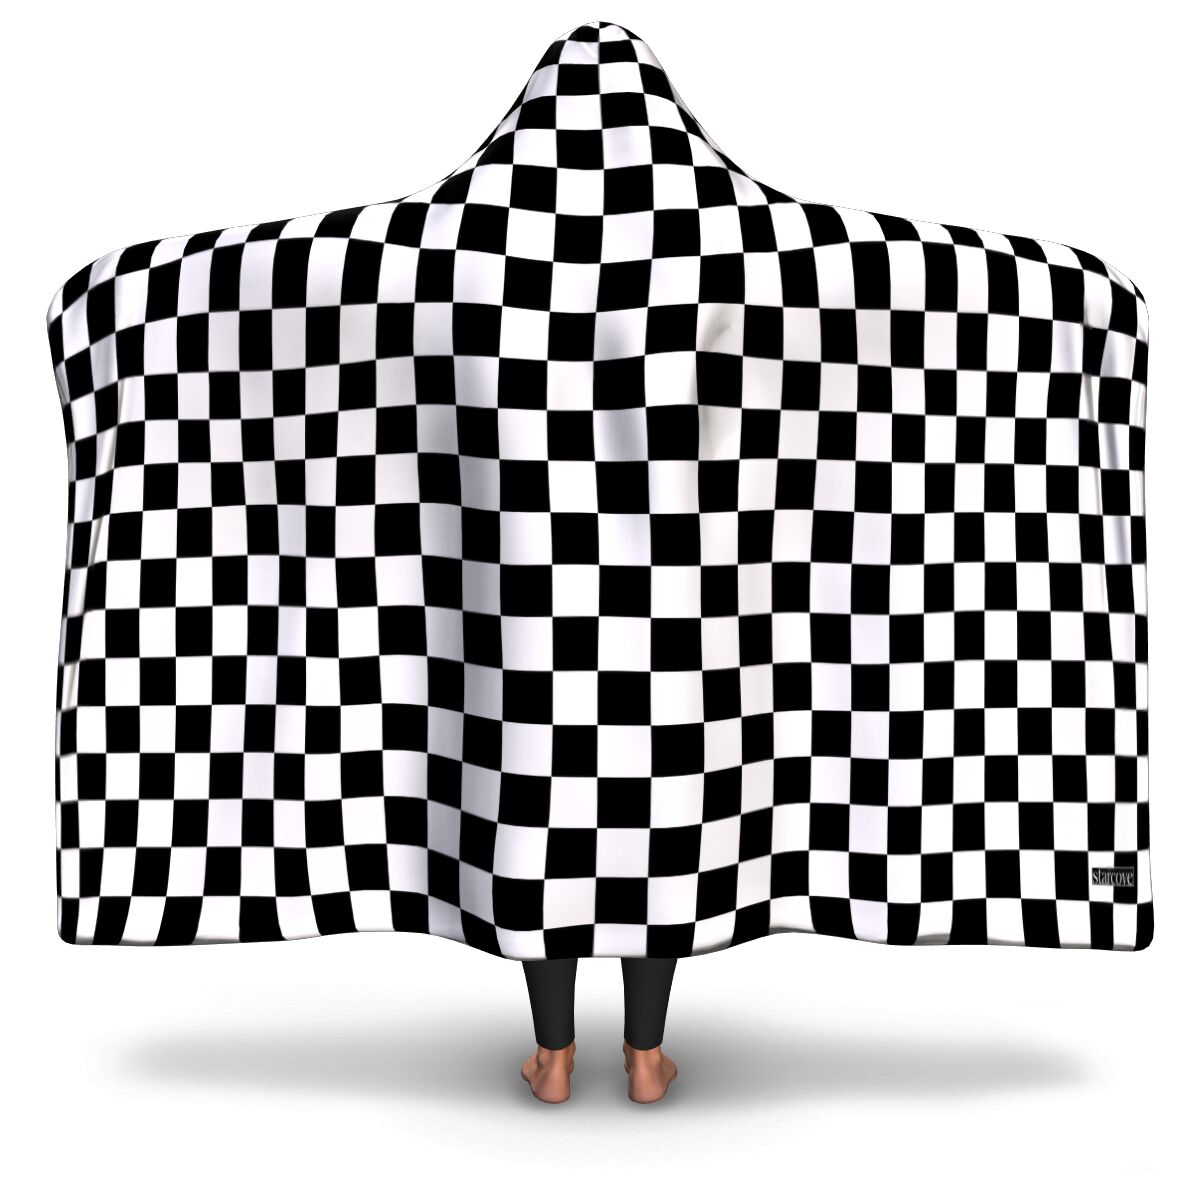 Black White Checkered Hooded Blanket, Check Racing Flag Fleece Microfiber Fluffy Sherpa Adult Youth Men Woman Wearable Cloak Winter Gift Starcove Fashion